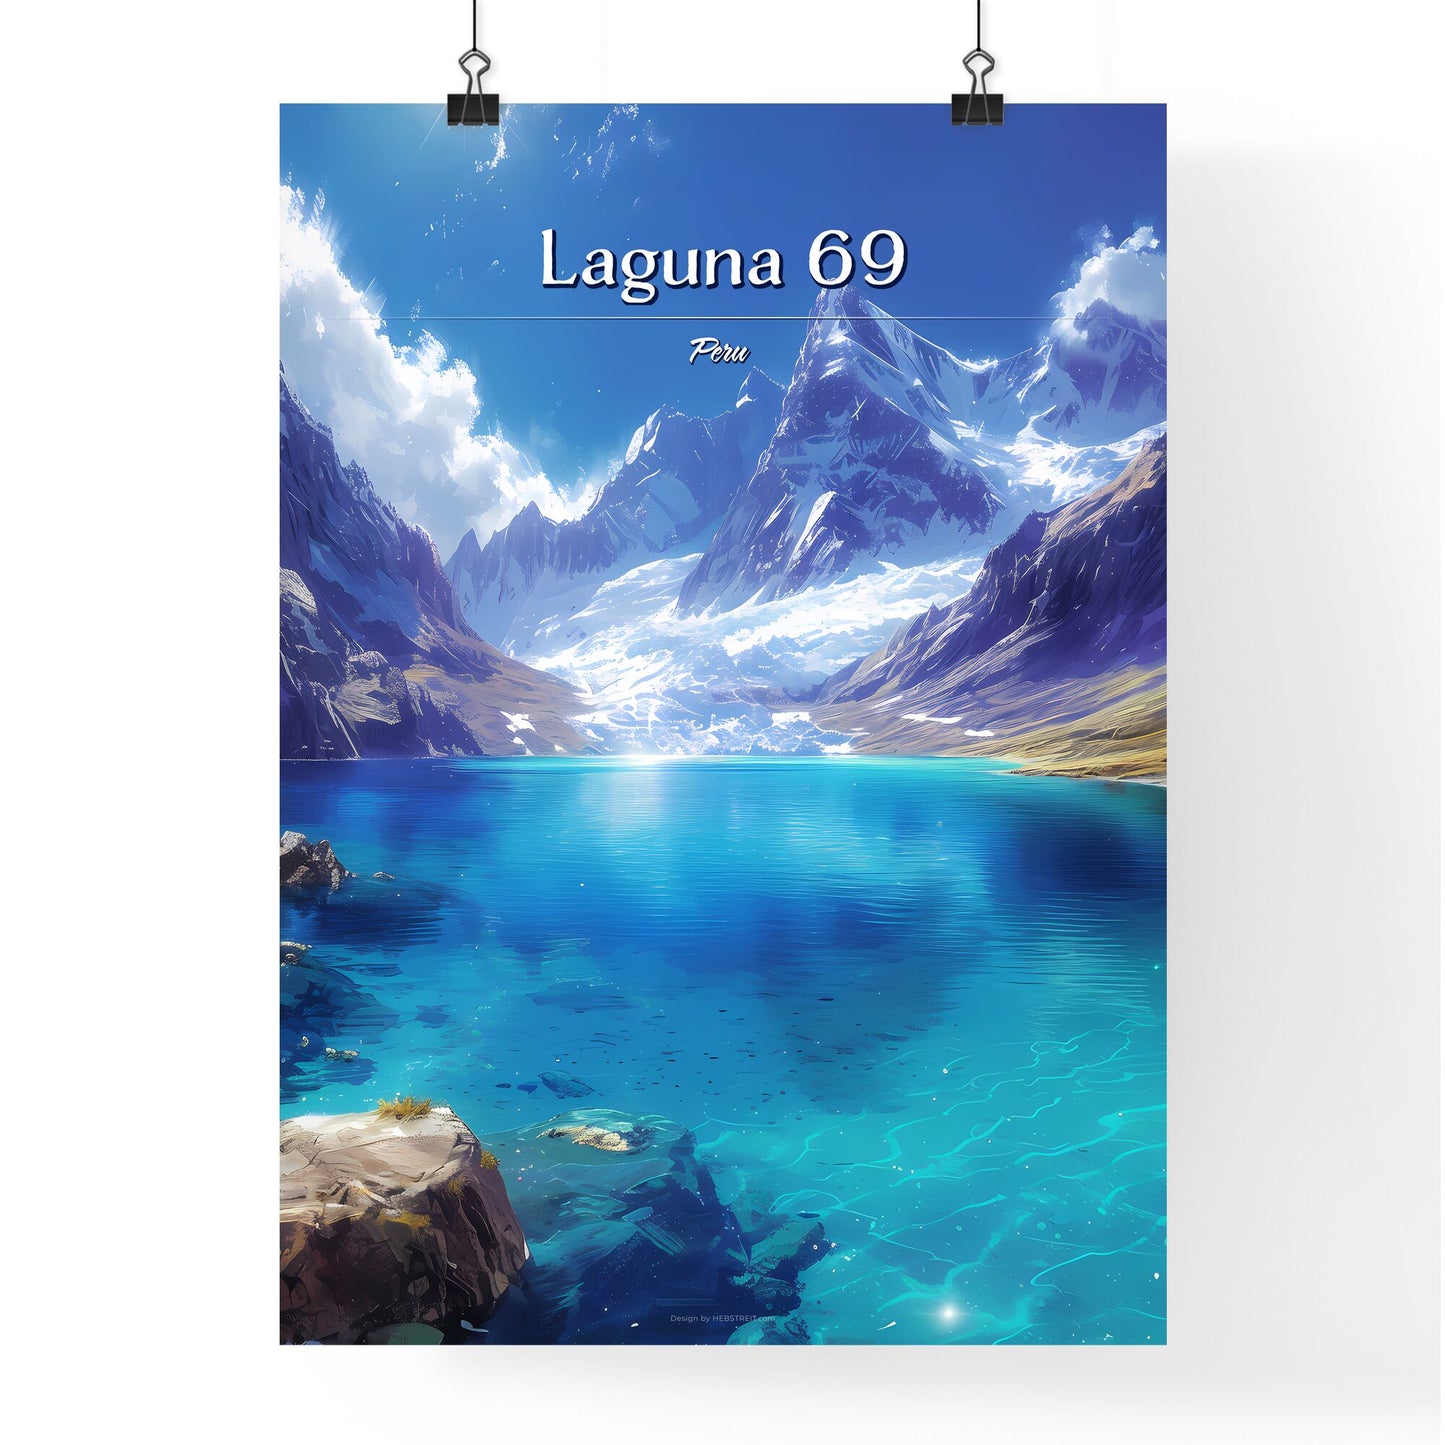 Laguna 69, Peru - Art print of a lake surrounded by mountains Default Title